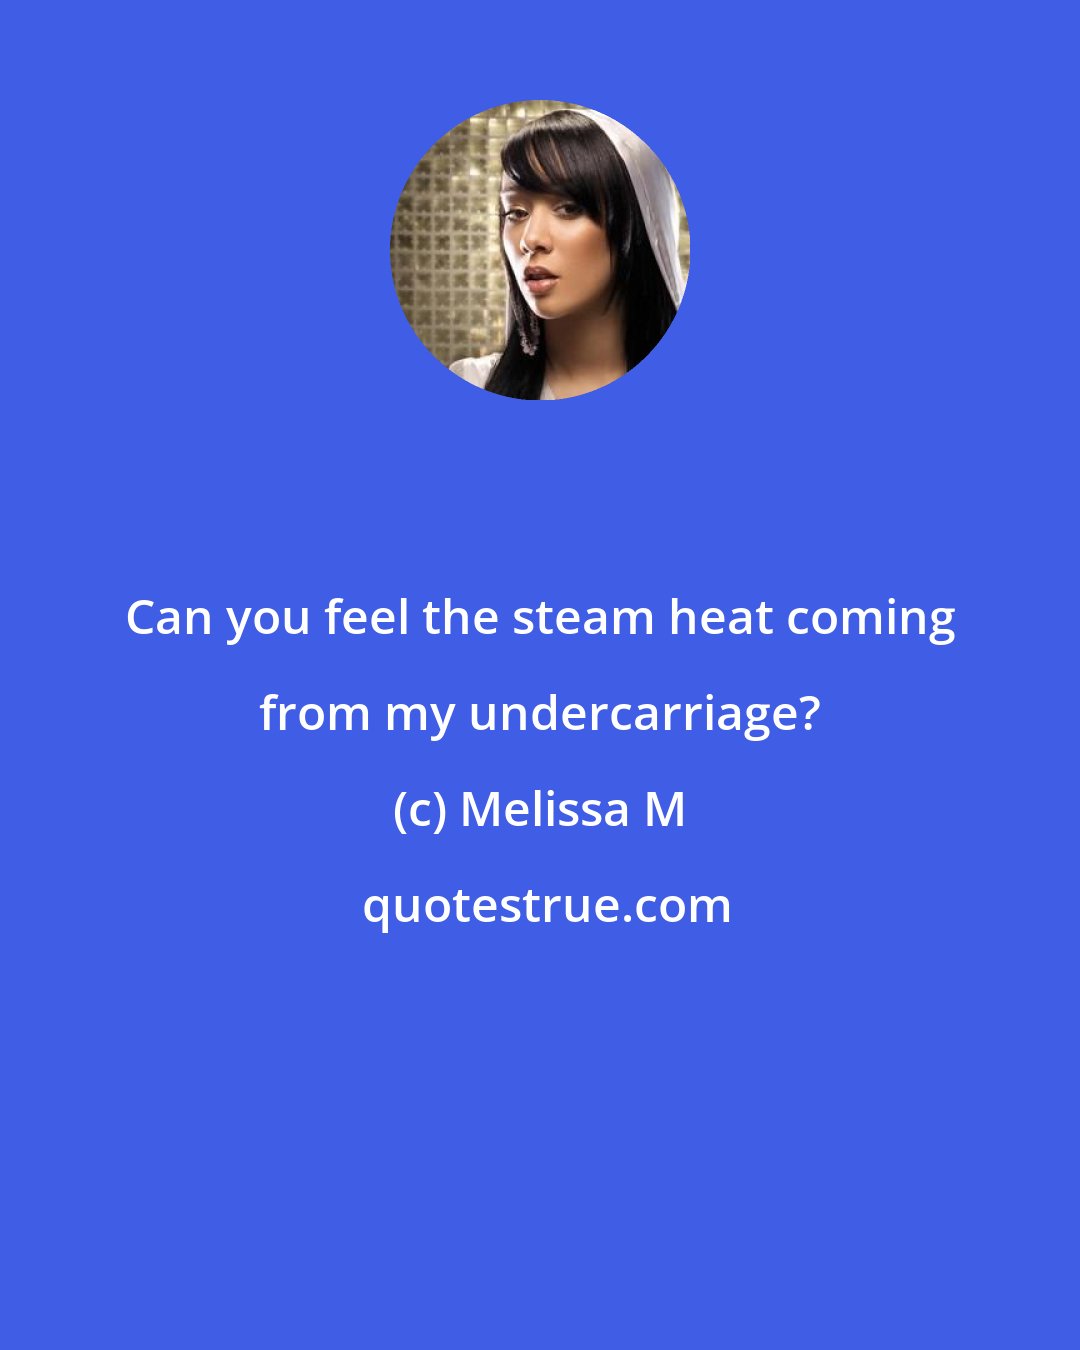 Melissa M: Can you feel the steam heat coming from my undercarriage?